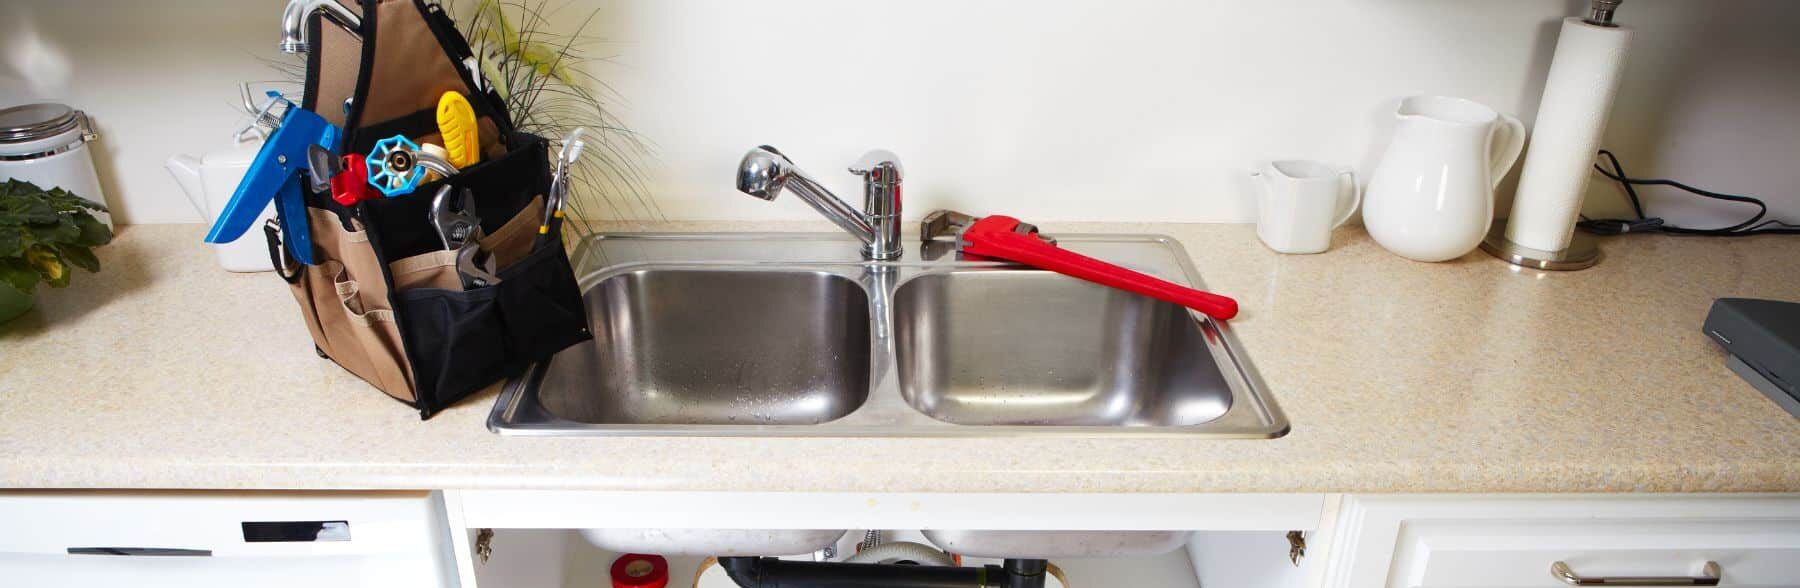 sink with plumbing tools on it